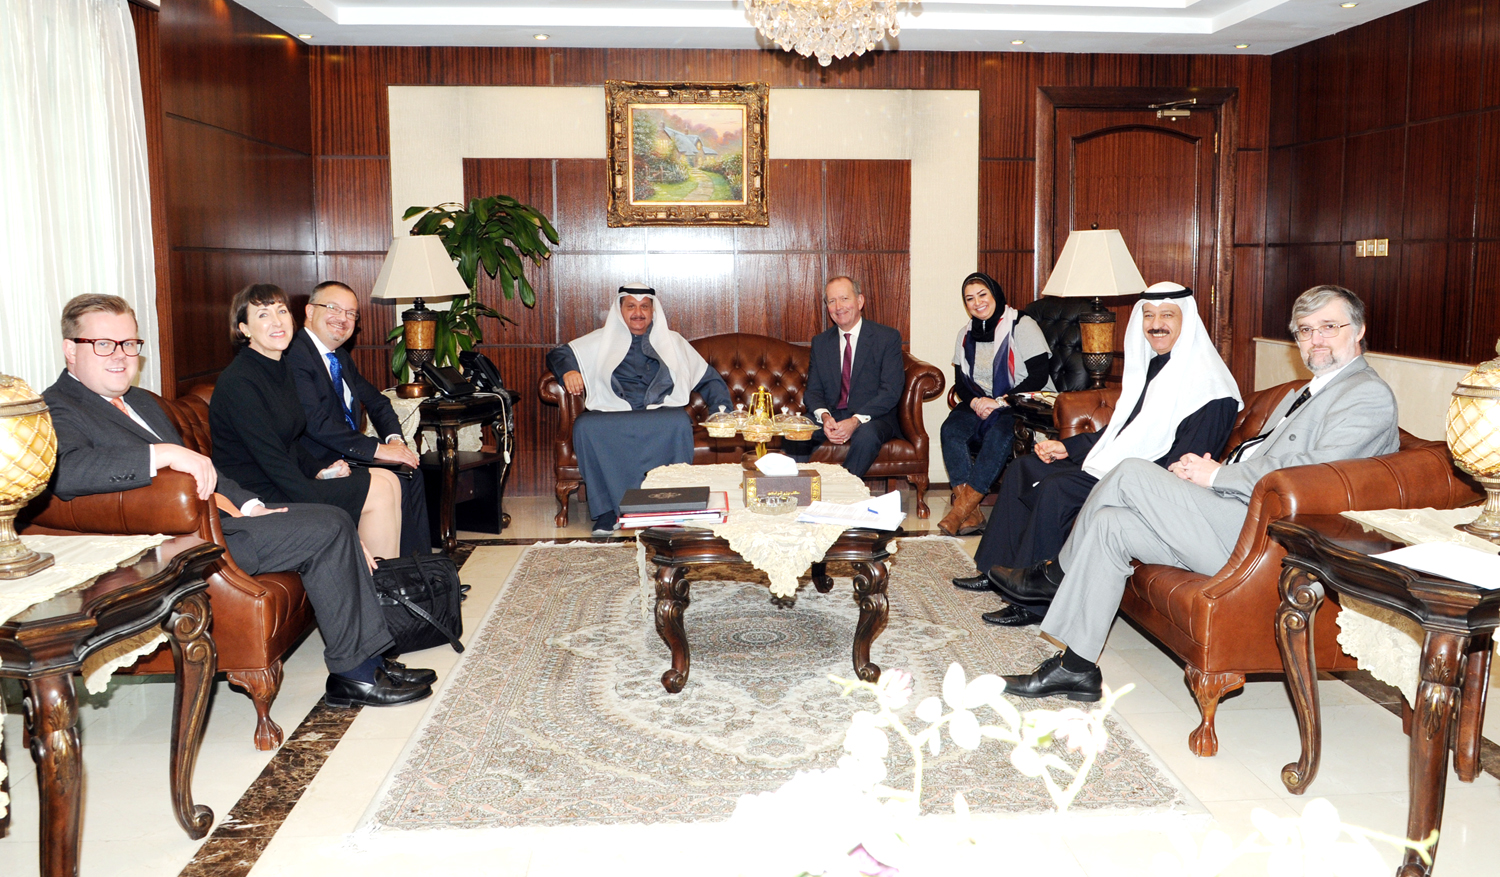 Minister of Communication and Minister of State for Municipal Affairs Issa Al-Kanderi meets Lord Mayor of the City of London Alderman Alan Yarrow